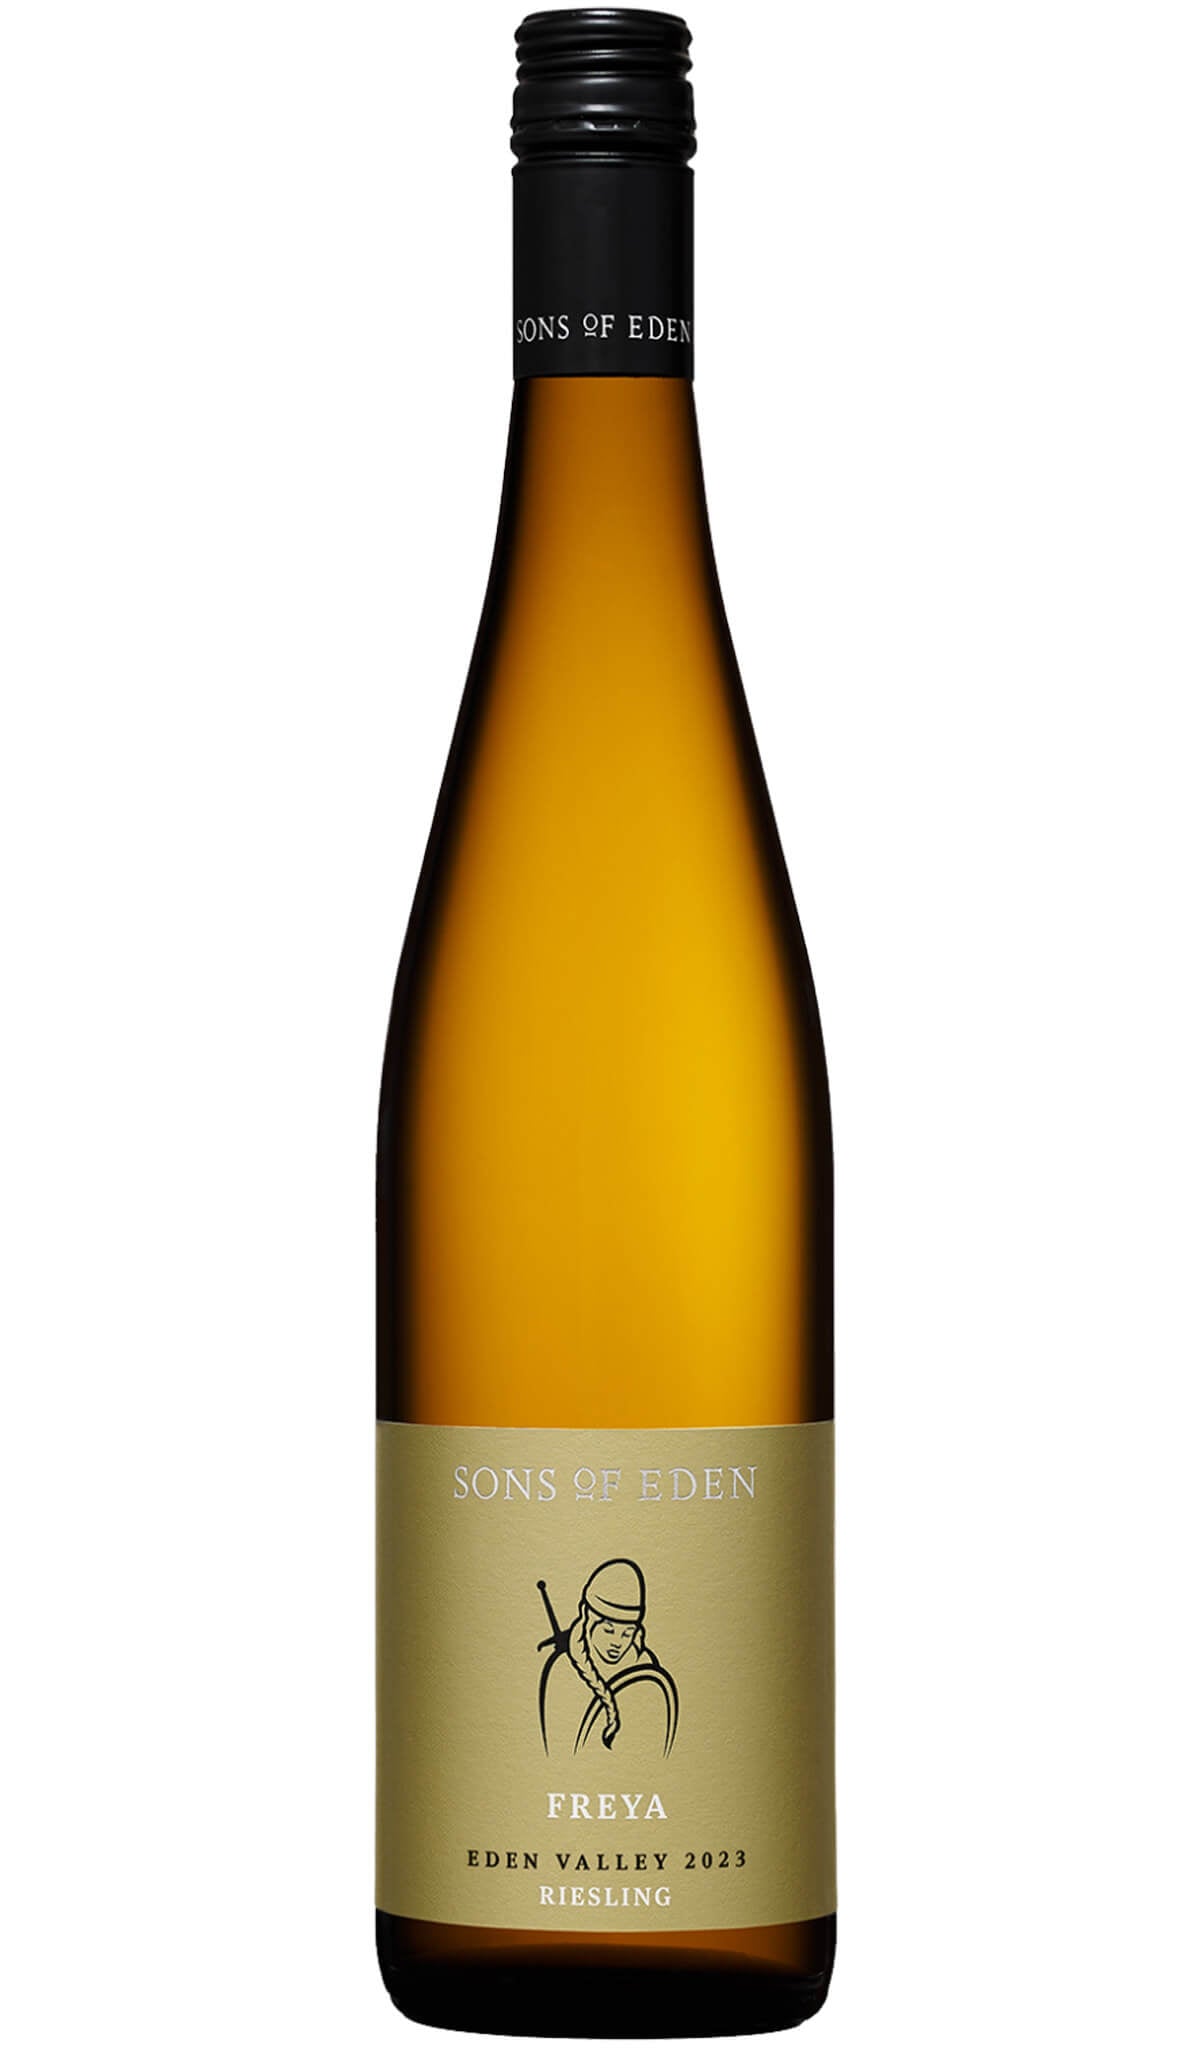 Find out more or buy Sons of Eden Freya Eden Valley Riesling 2023 online at Wine Sellers Direct - Australia’s independent liquor specialists.